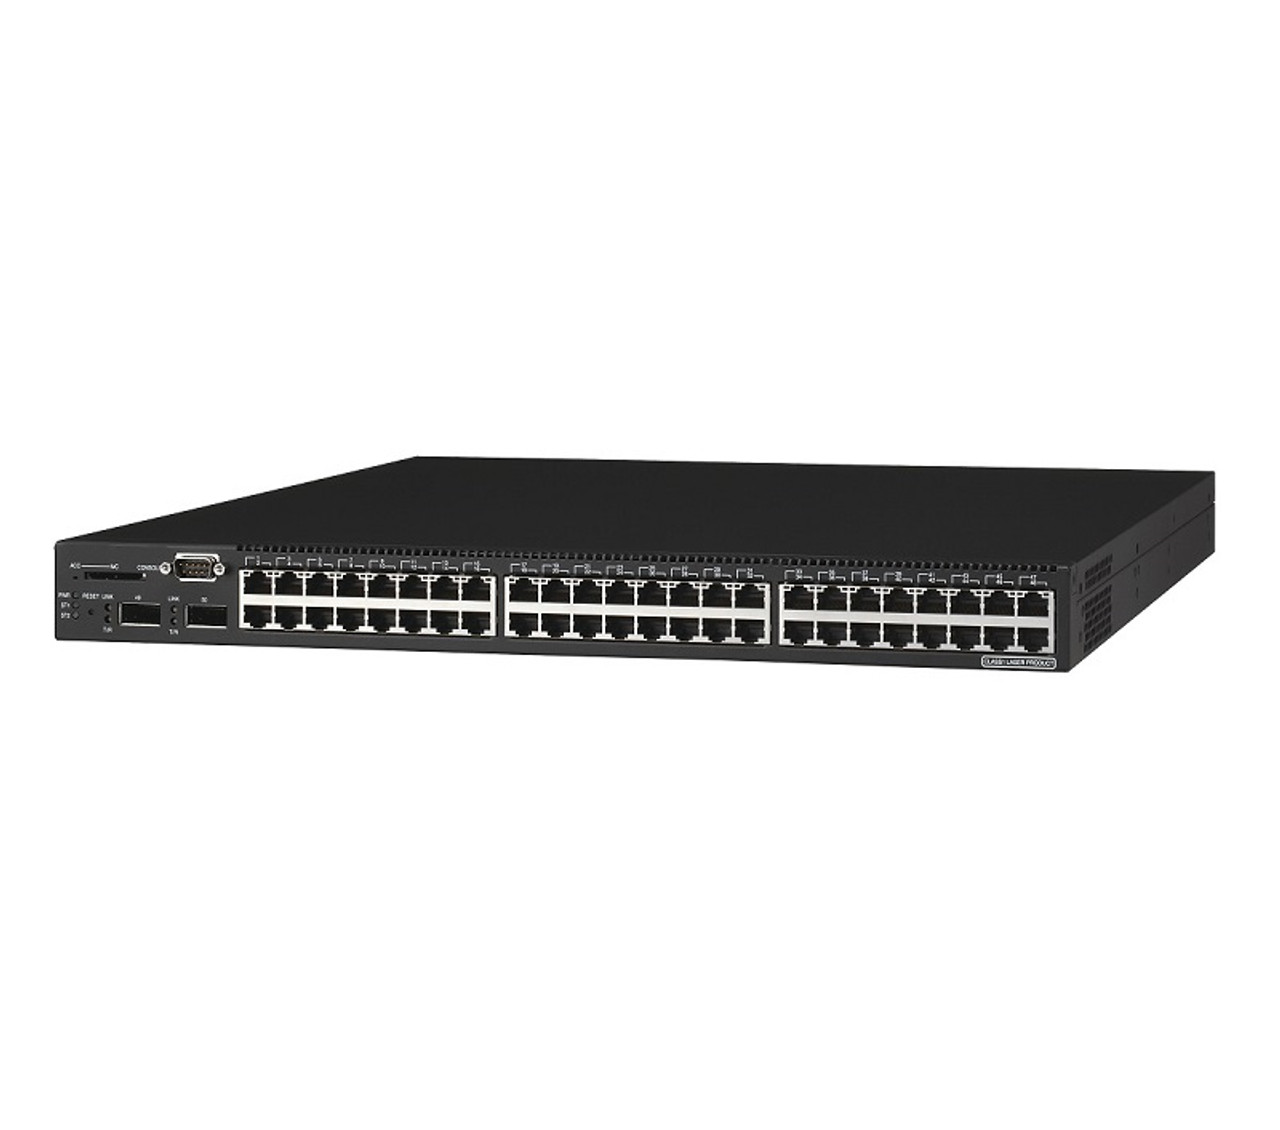 0M727K - Dell PowerConnect 3548P 48-Ports x 10/100 + 2 x shared SFP + 2 x 10/100/1000 Fast Ethernet Poe Switch (Refurbished)